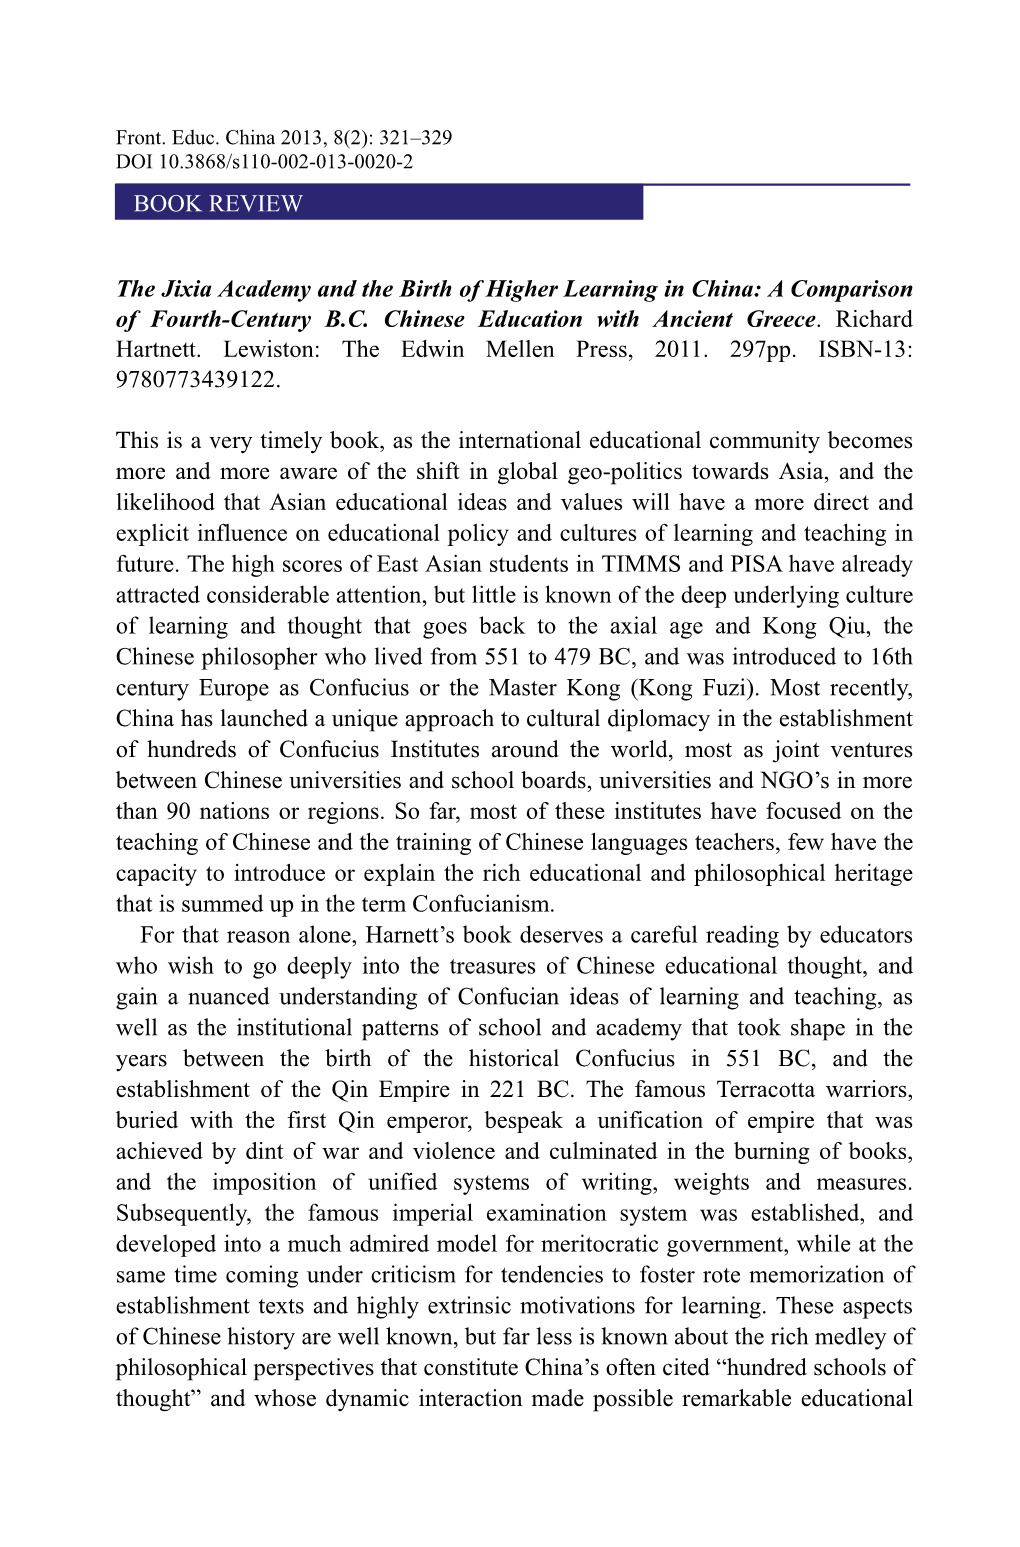 BOOK REVIEW the Jixia Academy and the Birth of Higher Learning in China: a Comparison of Fourth-Century B.C. Chinese Education W